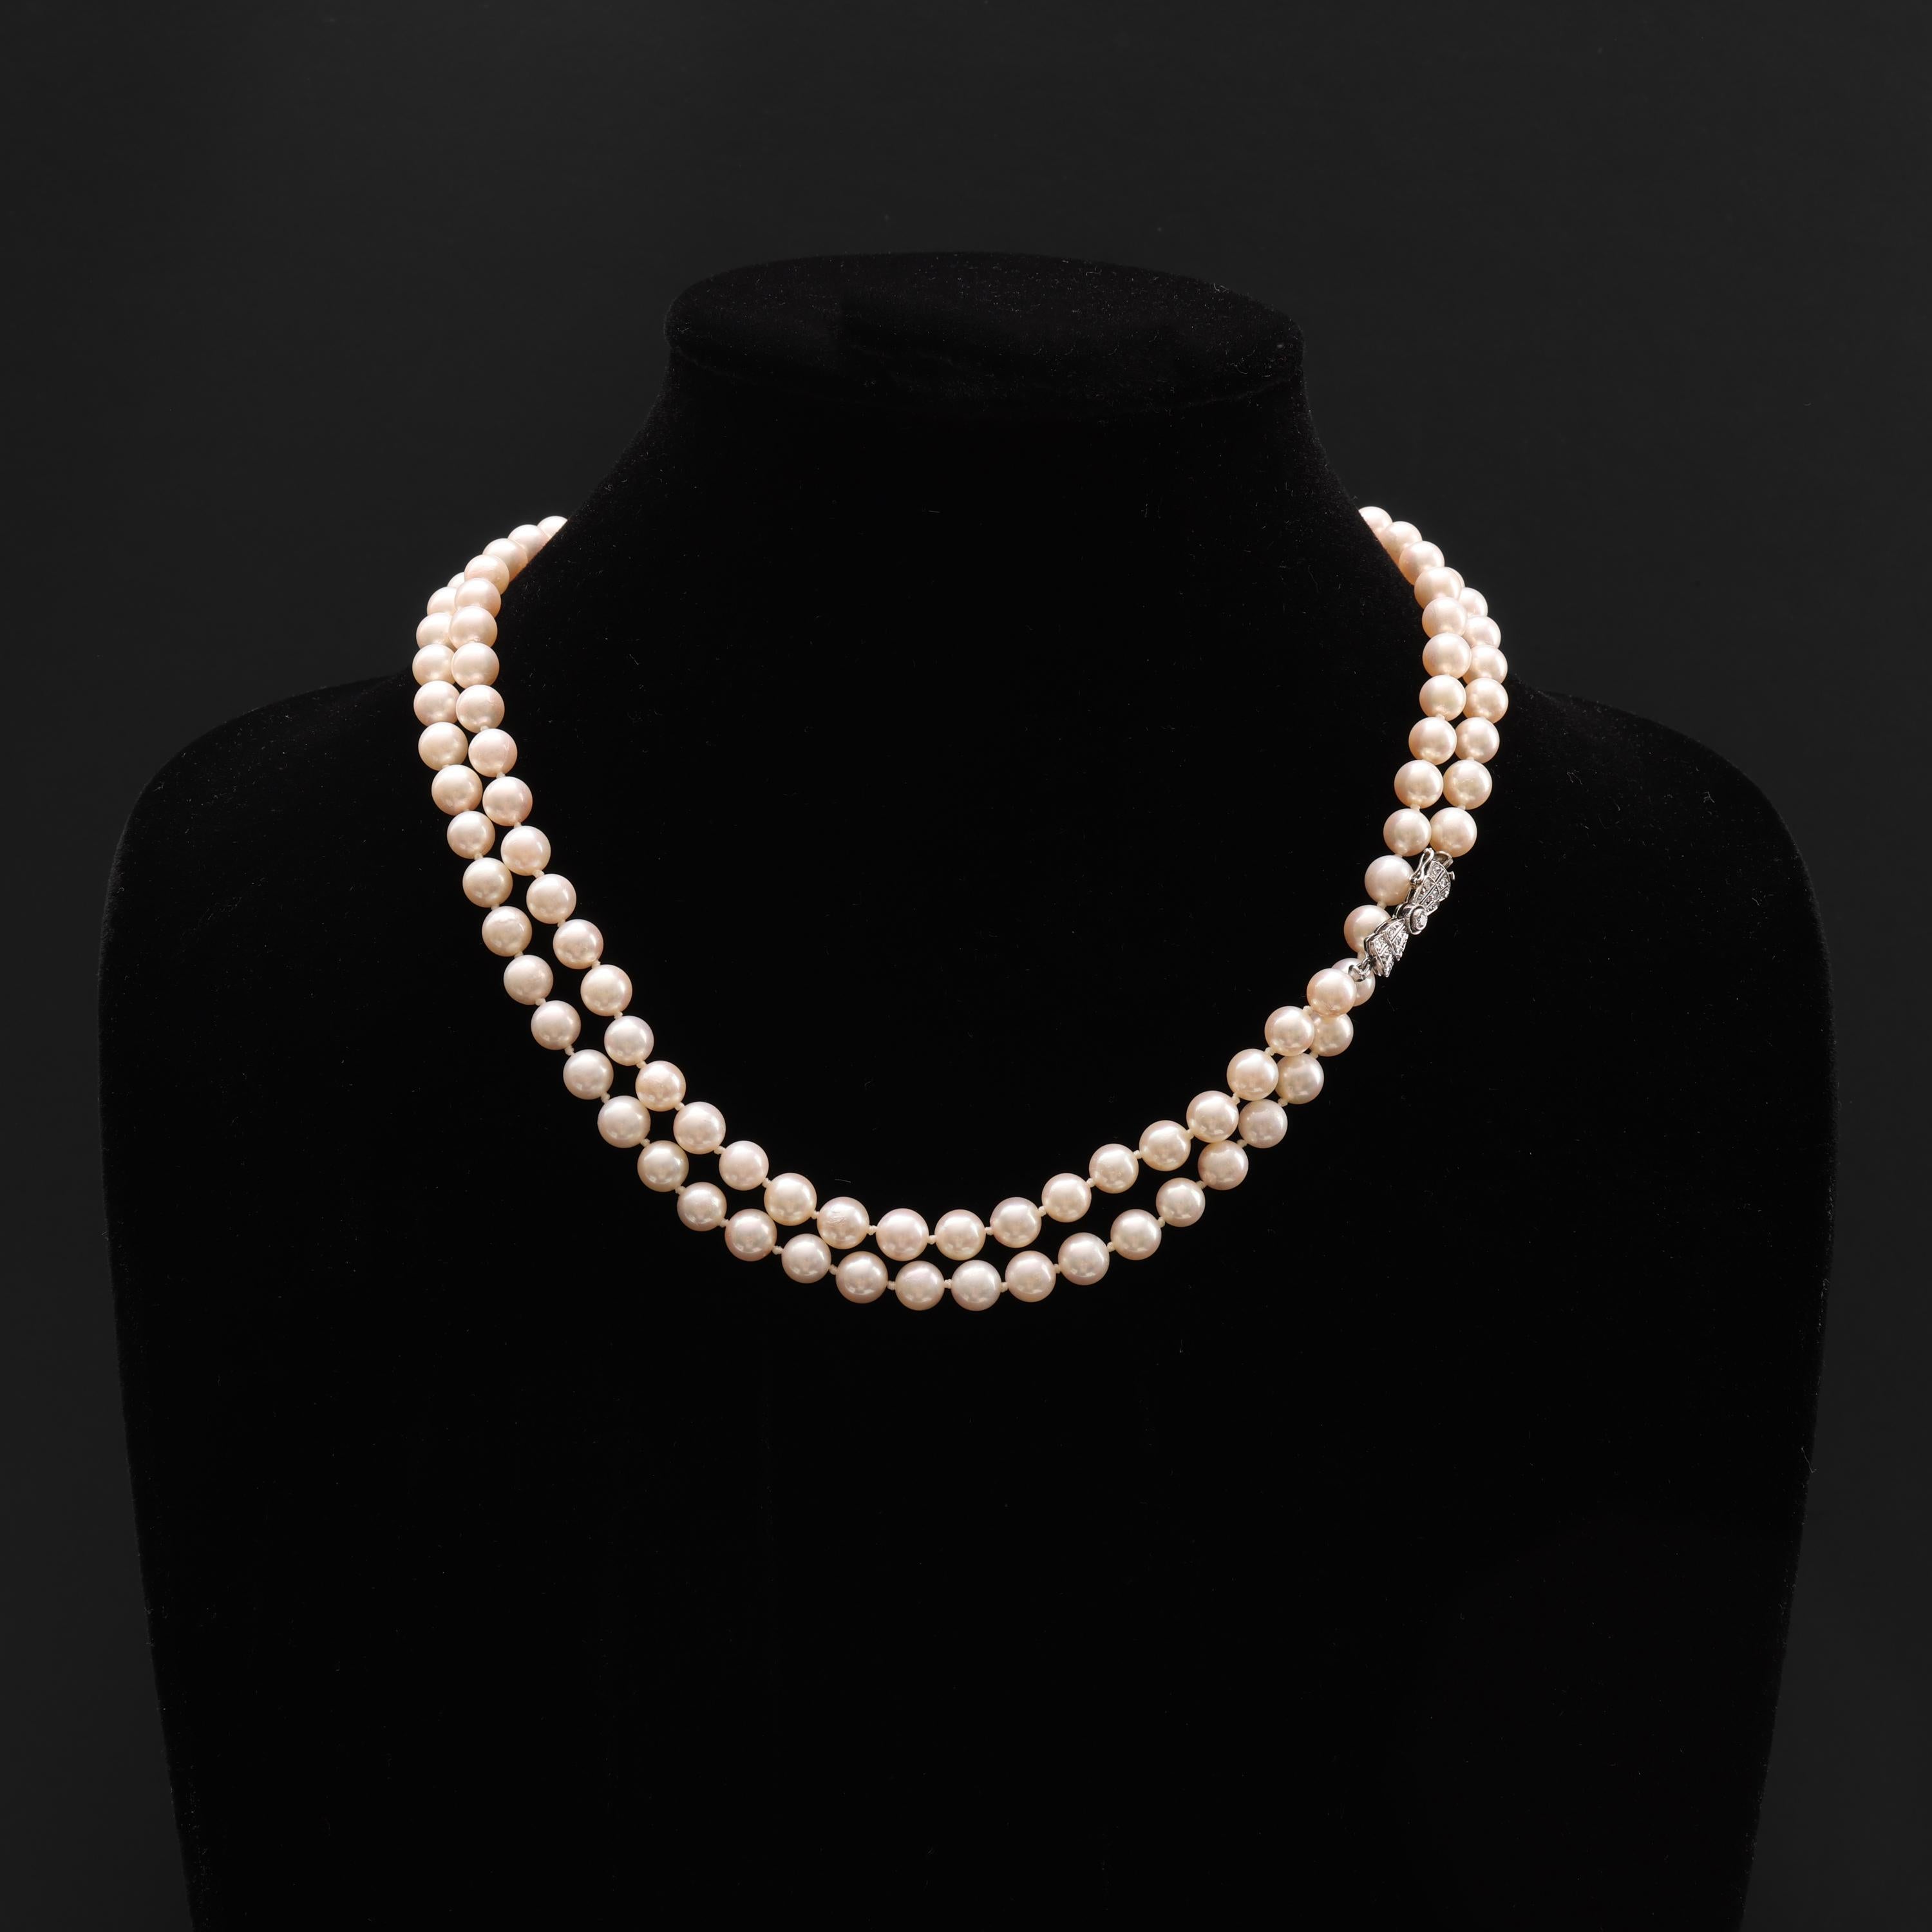 121 gleaming and luminous cultured Akoya pearls form this magnificent Art Deco-era necklace. The opera-length -37 inch- necklace is completed by a 14k white gold bow clasp set with old-cut diamonds.  The pearls range in size from 6mm to nearly 7mm